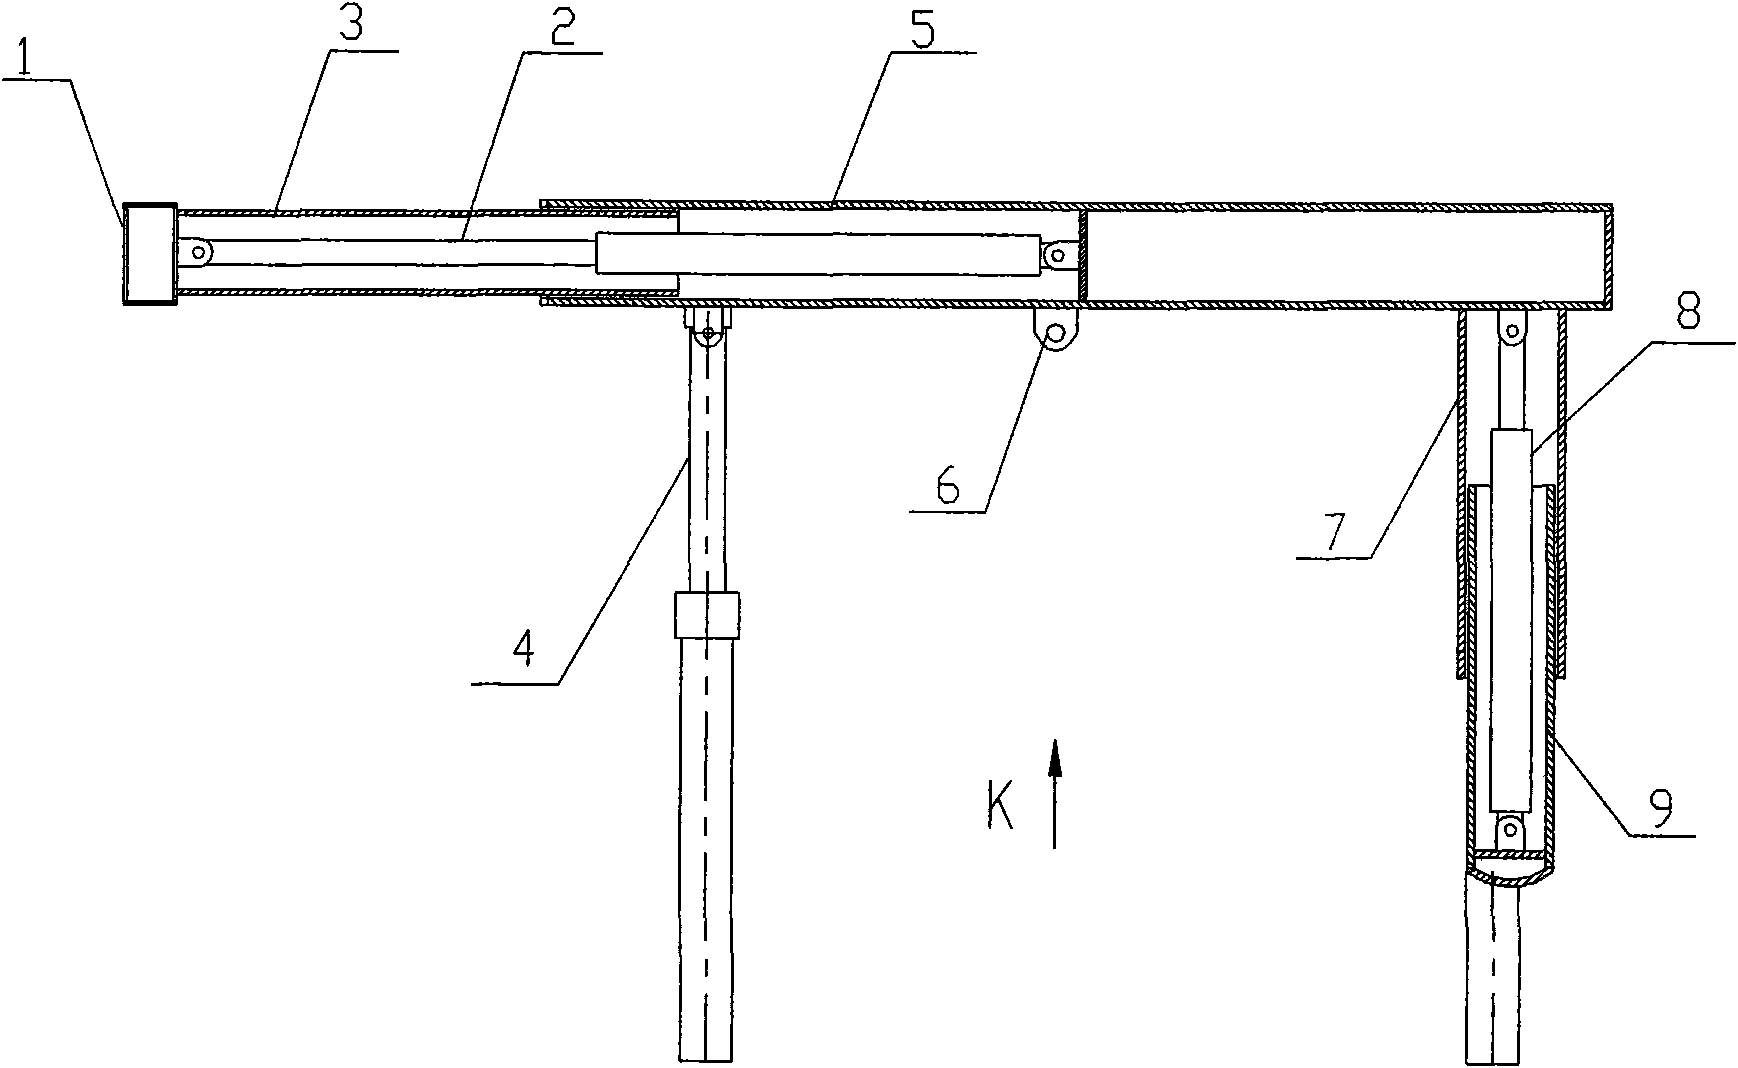 Traction sliding hydraulic support system